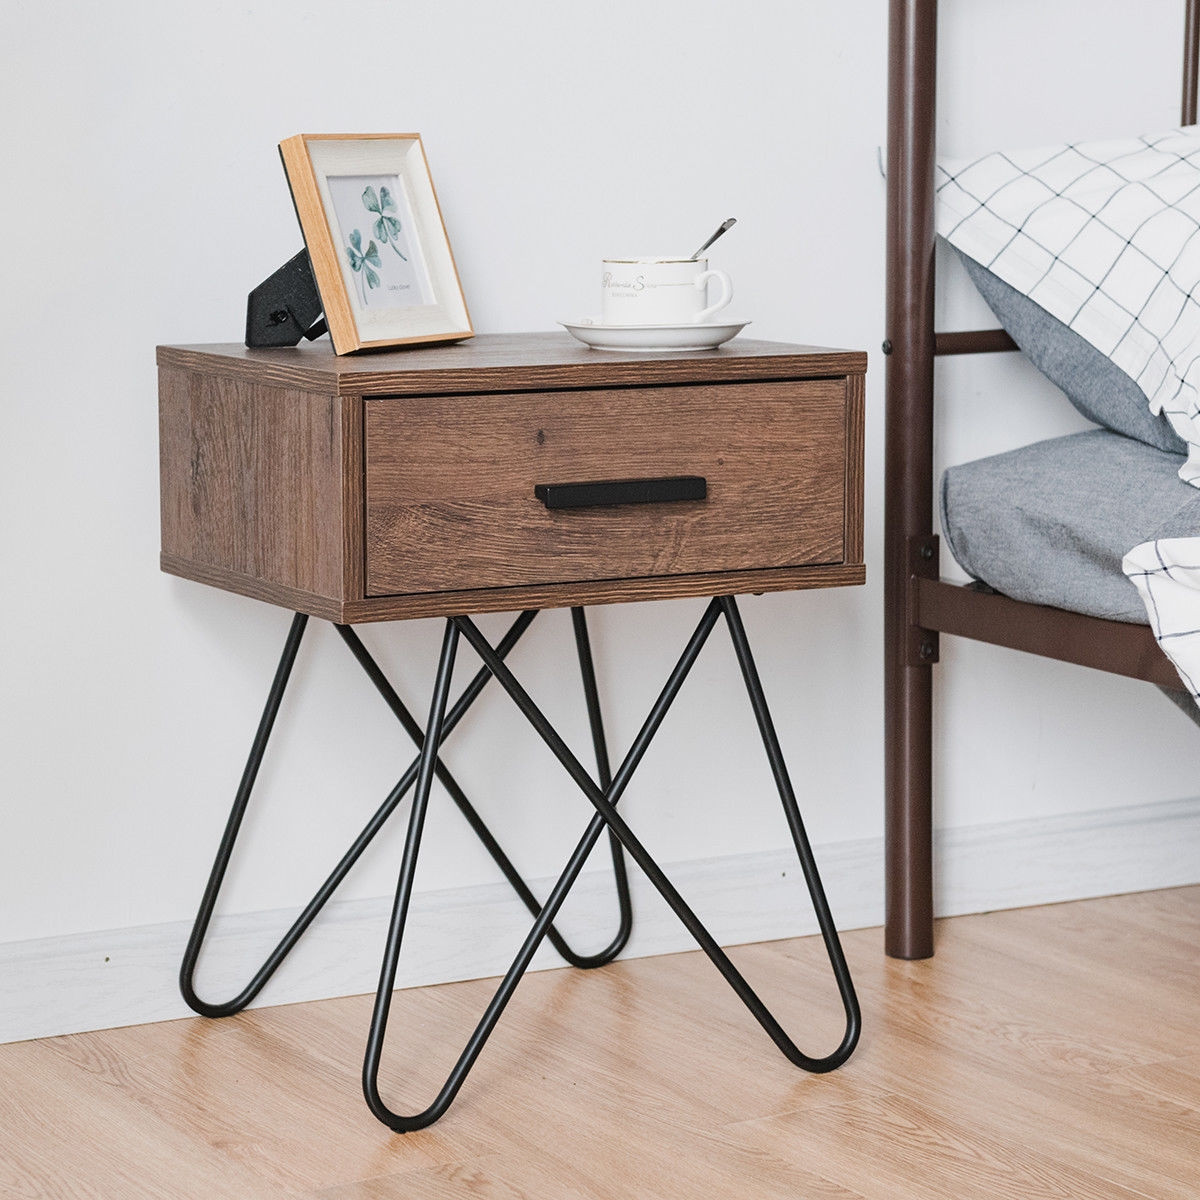 Nightstand Coffee Table Storage Display With Steel Legs And 1 Drawer